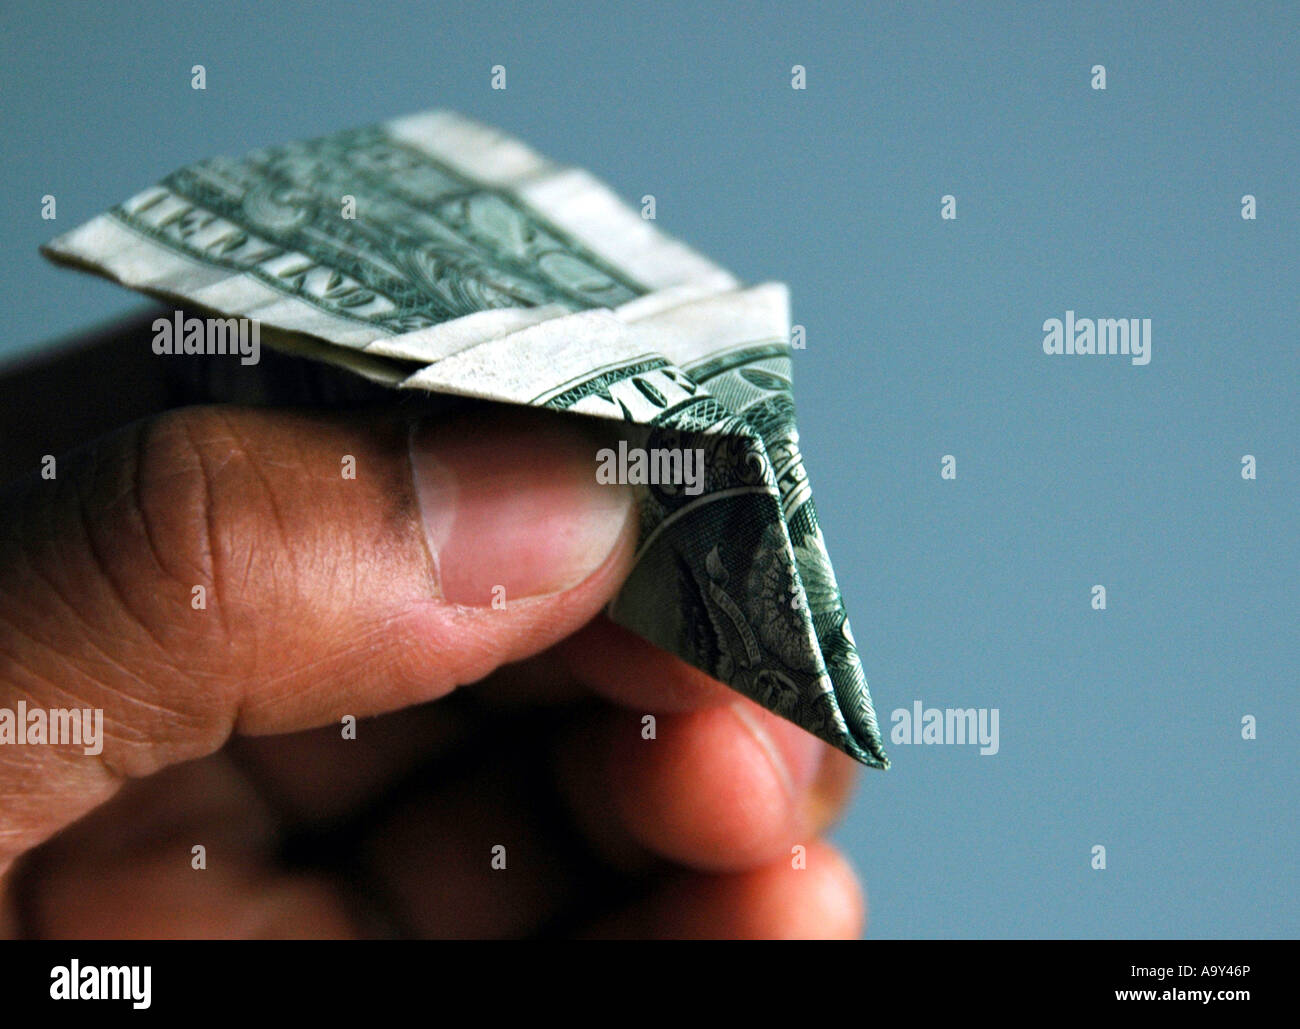 Paper Airplane Made of Money Stock Photo